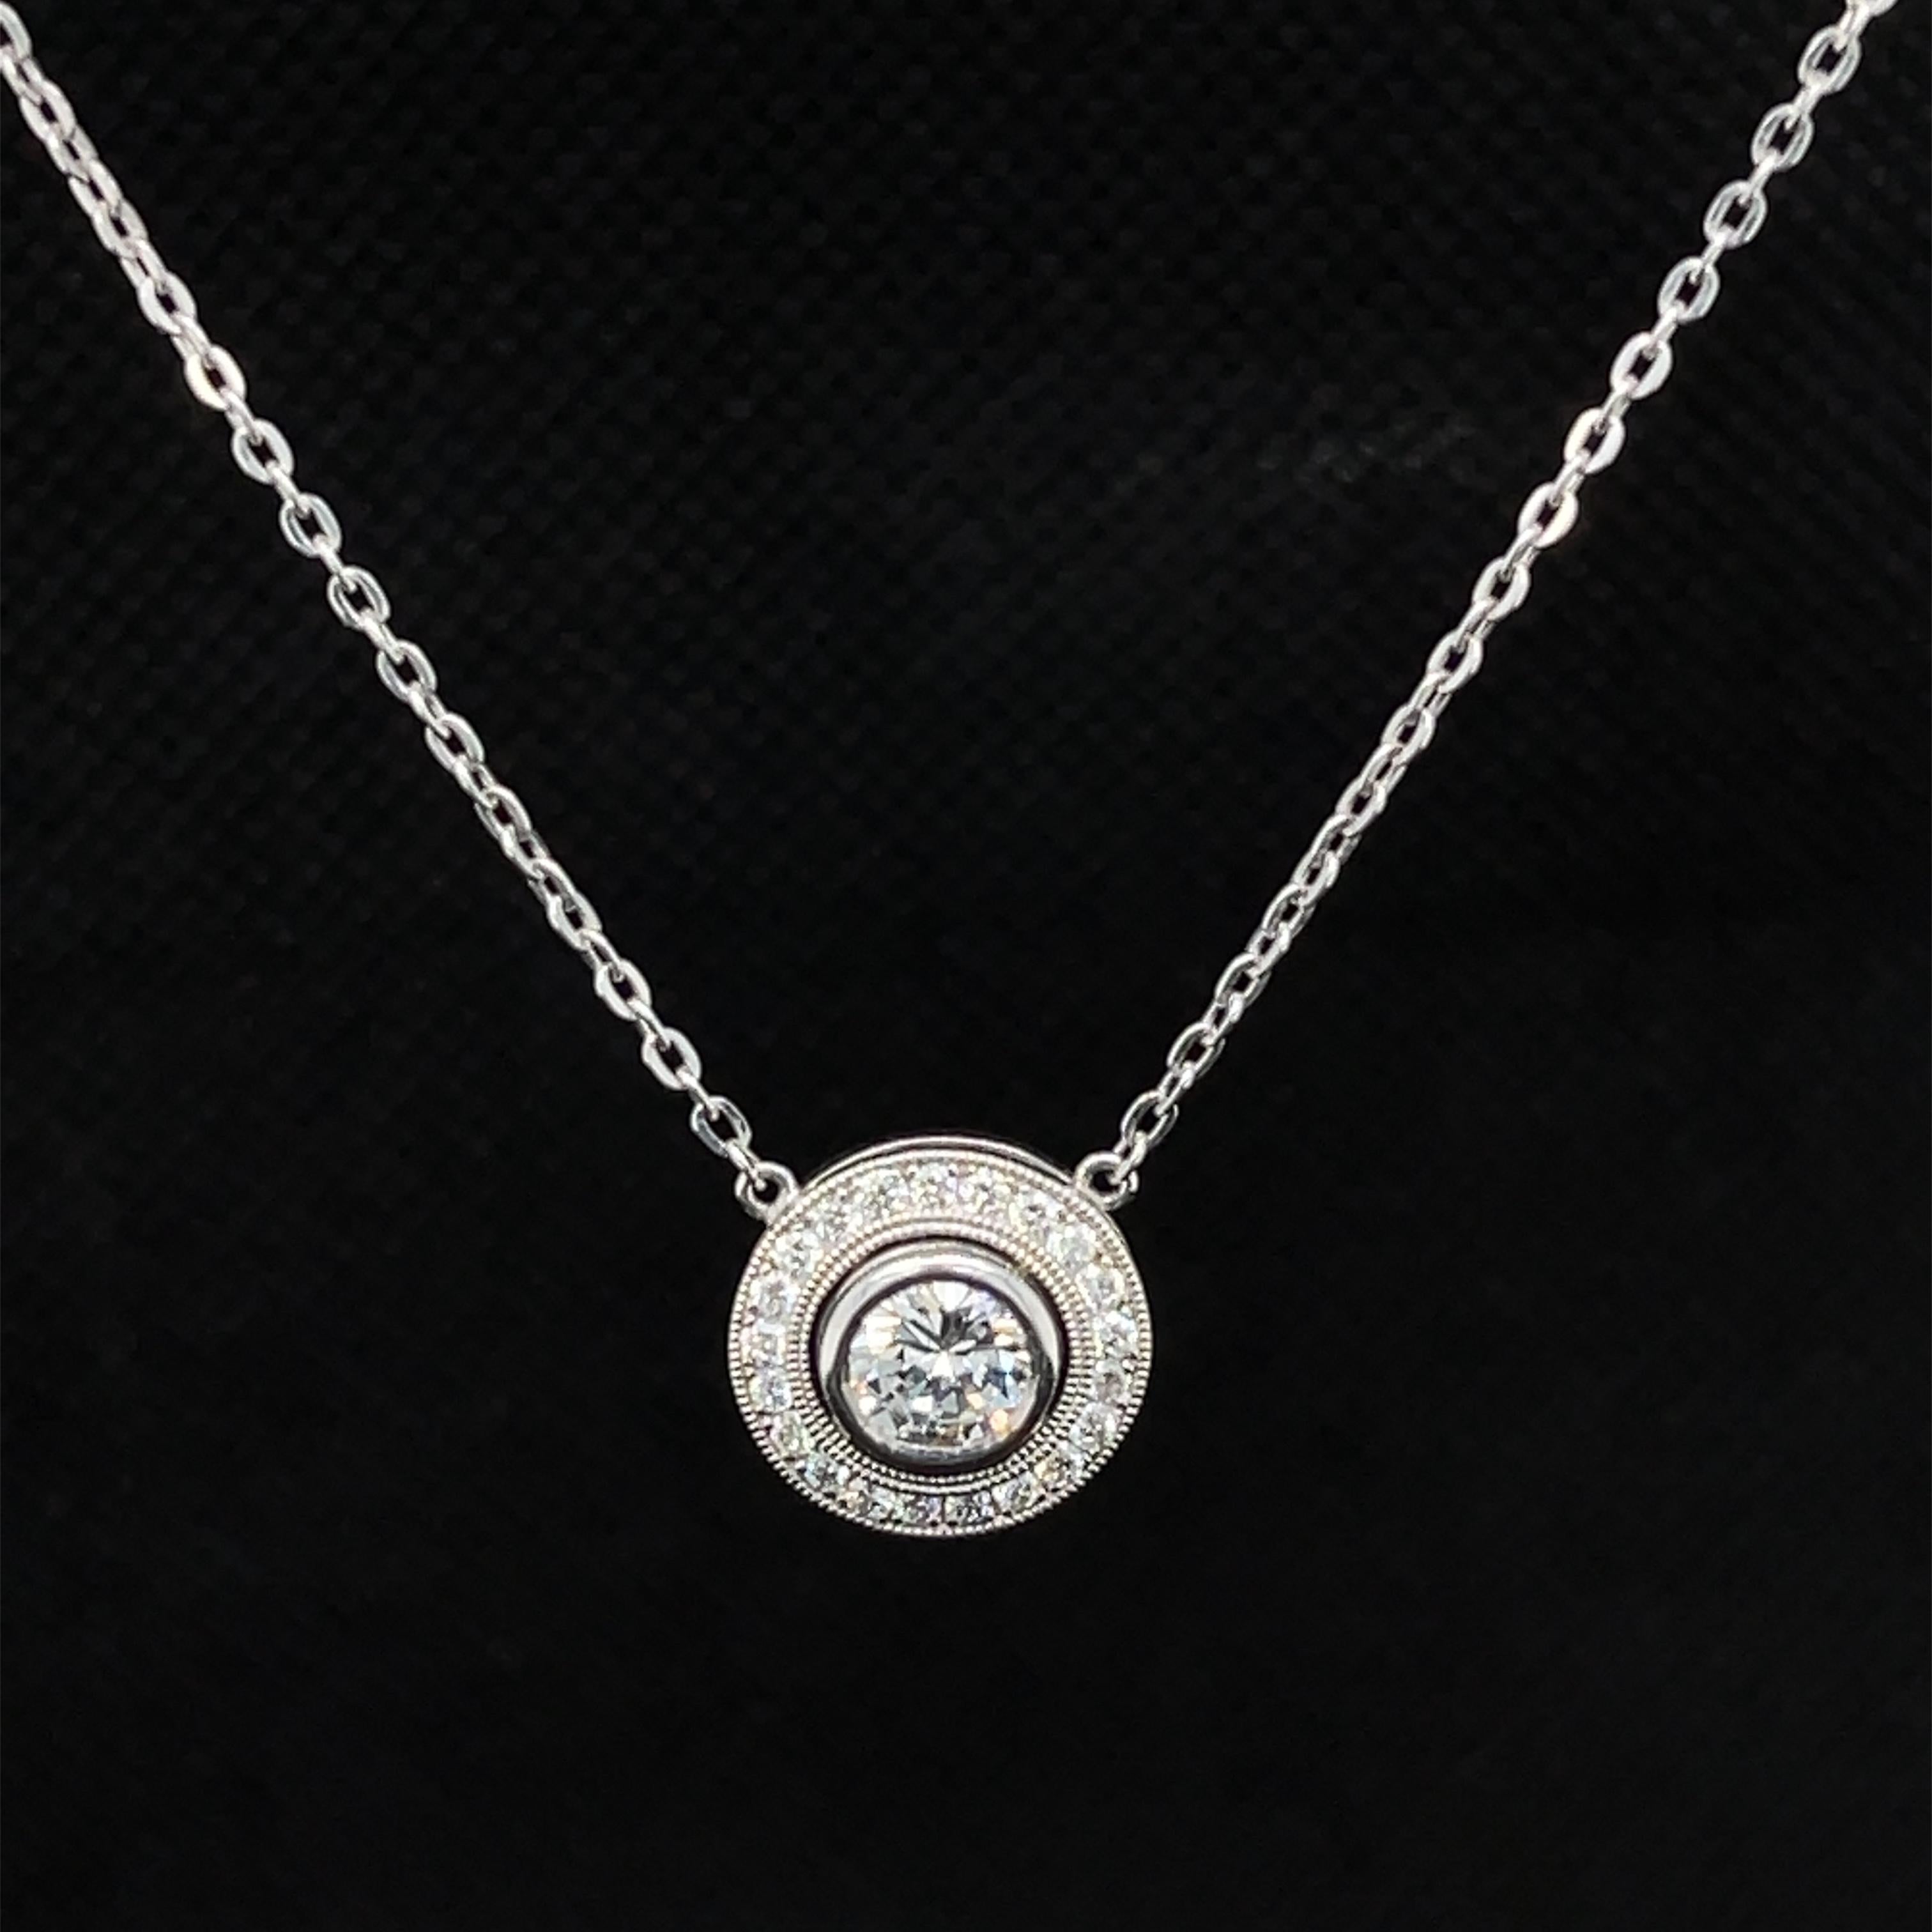 This refined and elegant diamond necklace can be worn as an everyday 